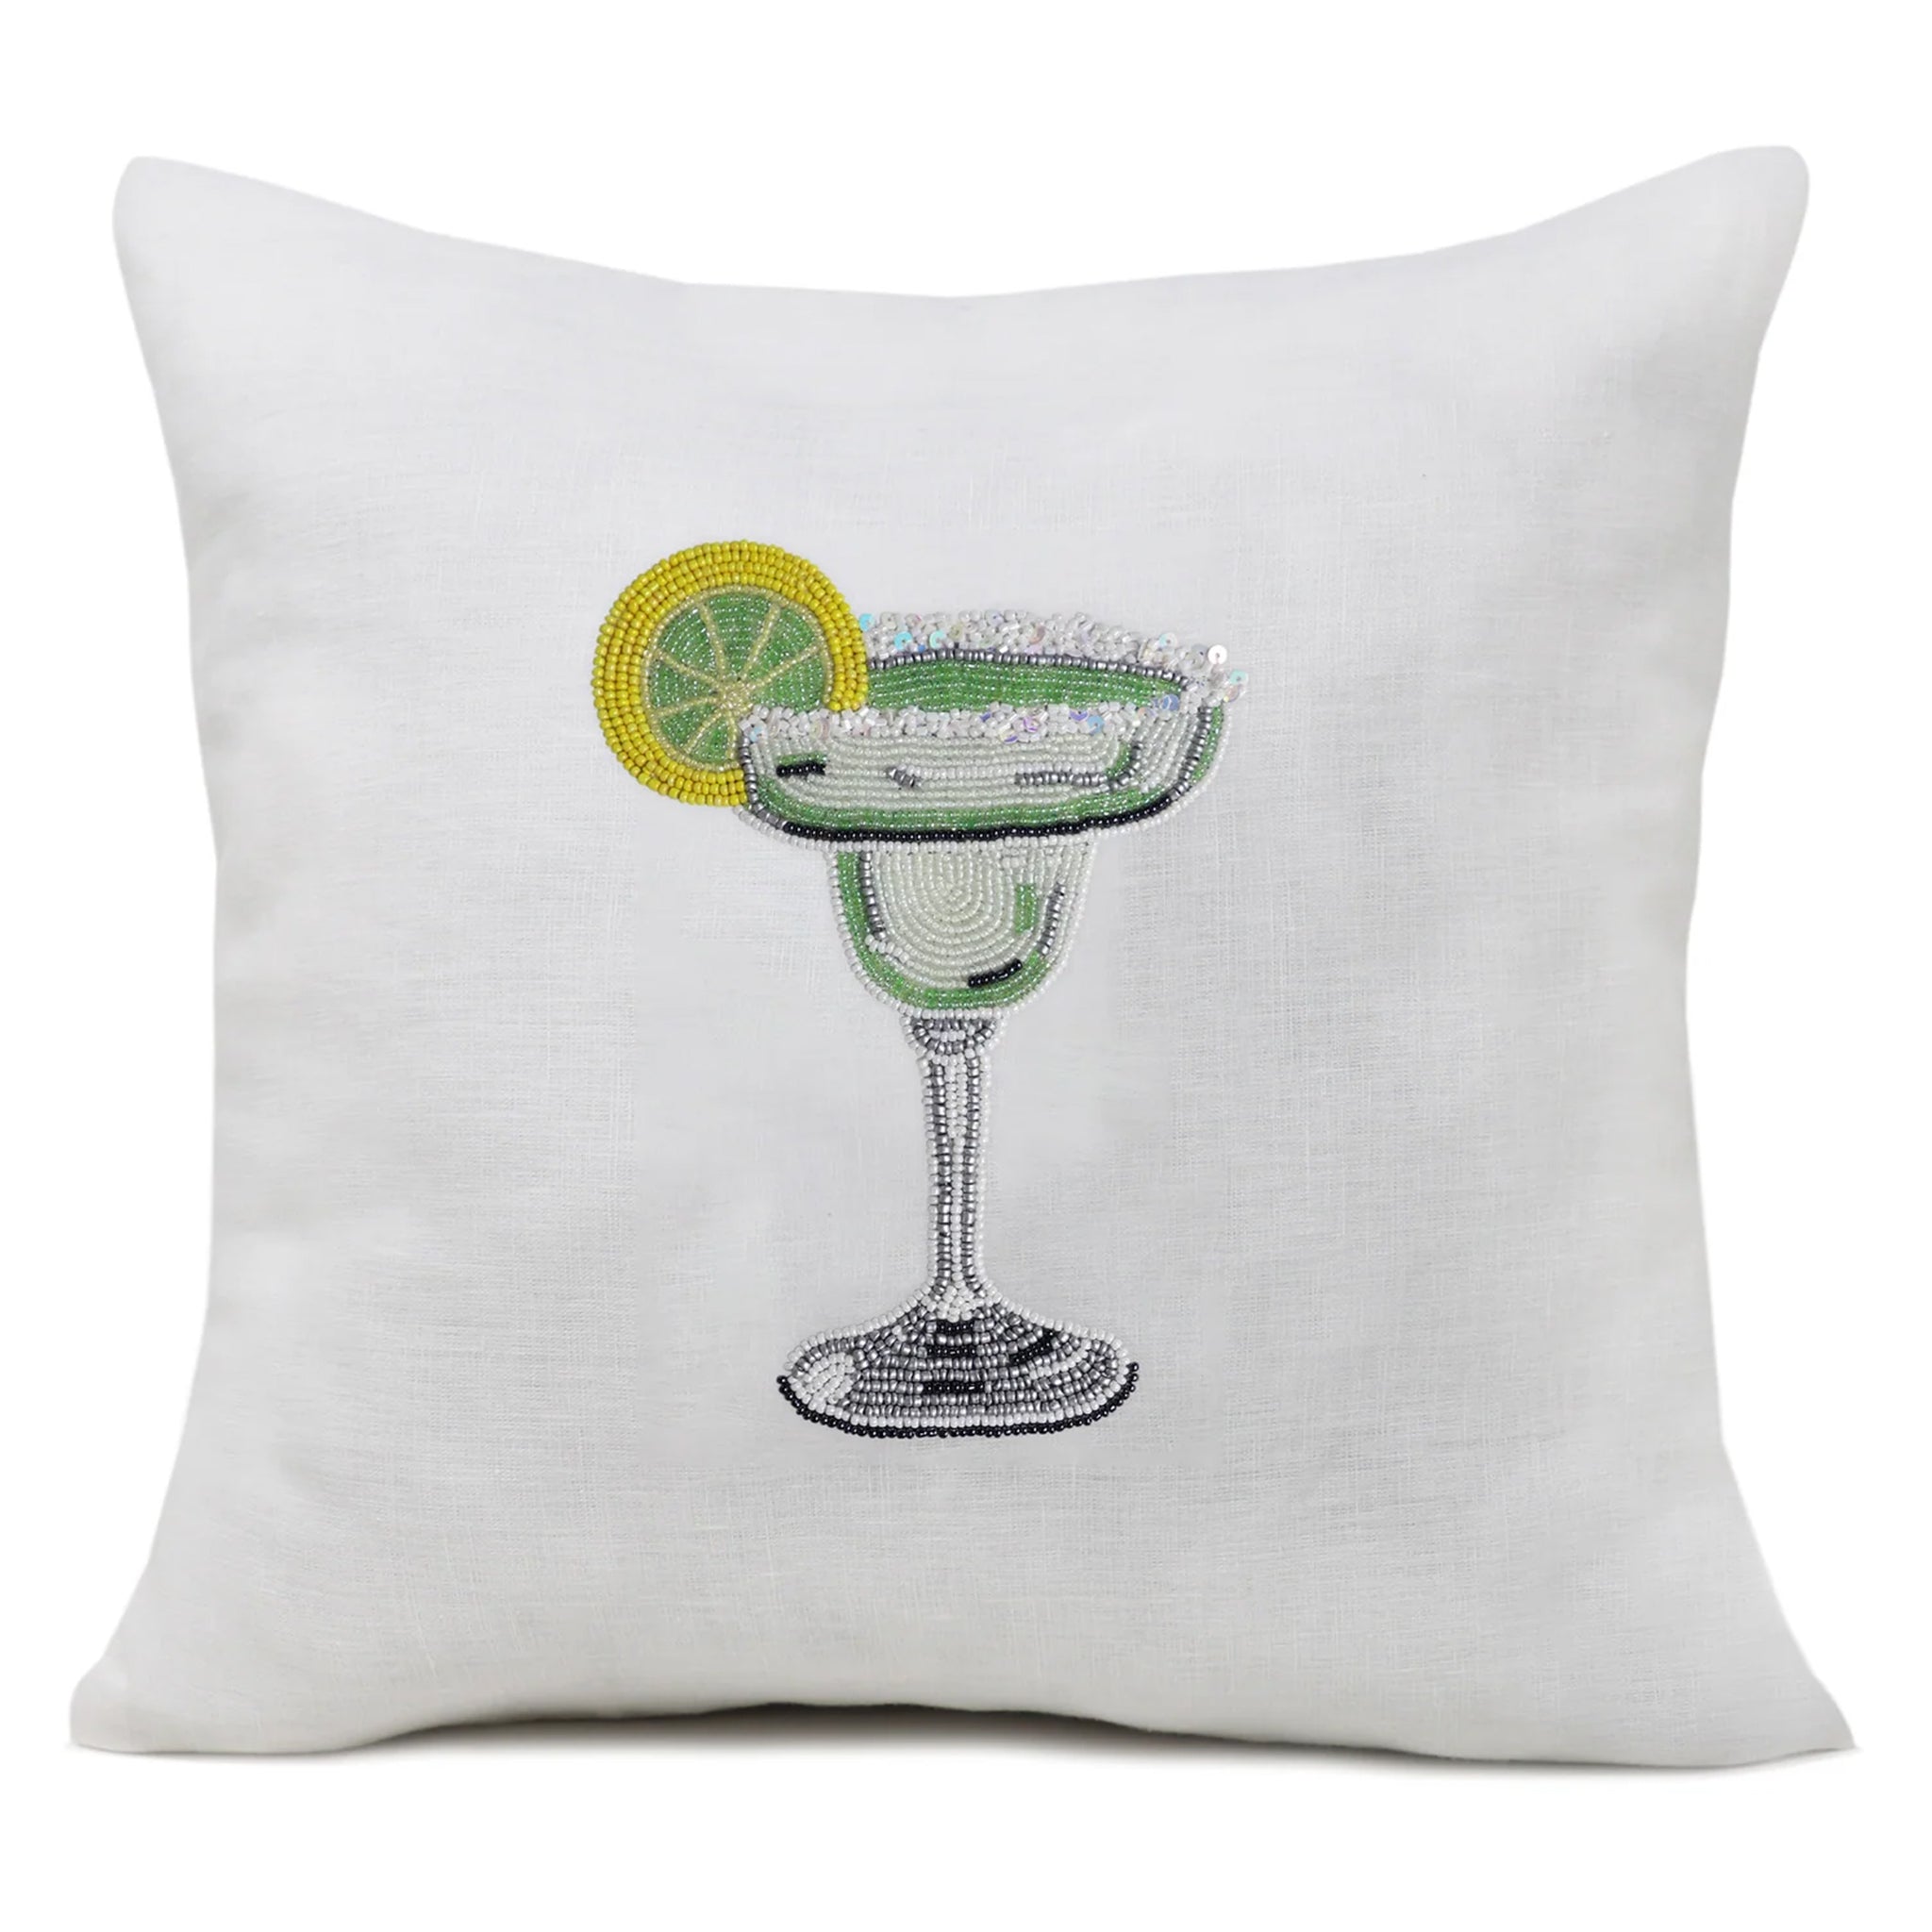 Cocktail Pillow Cover, Drinks Pillow Cover